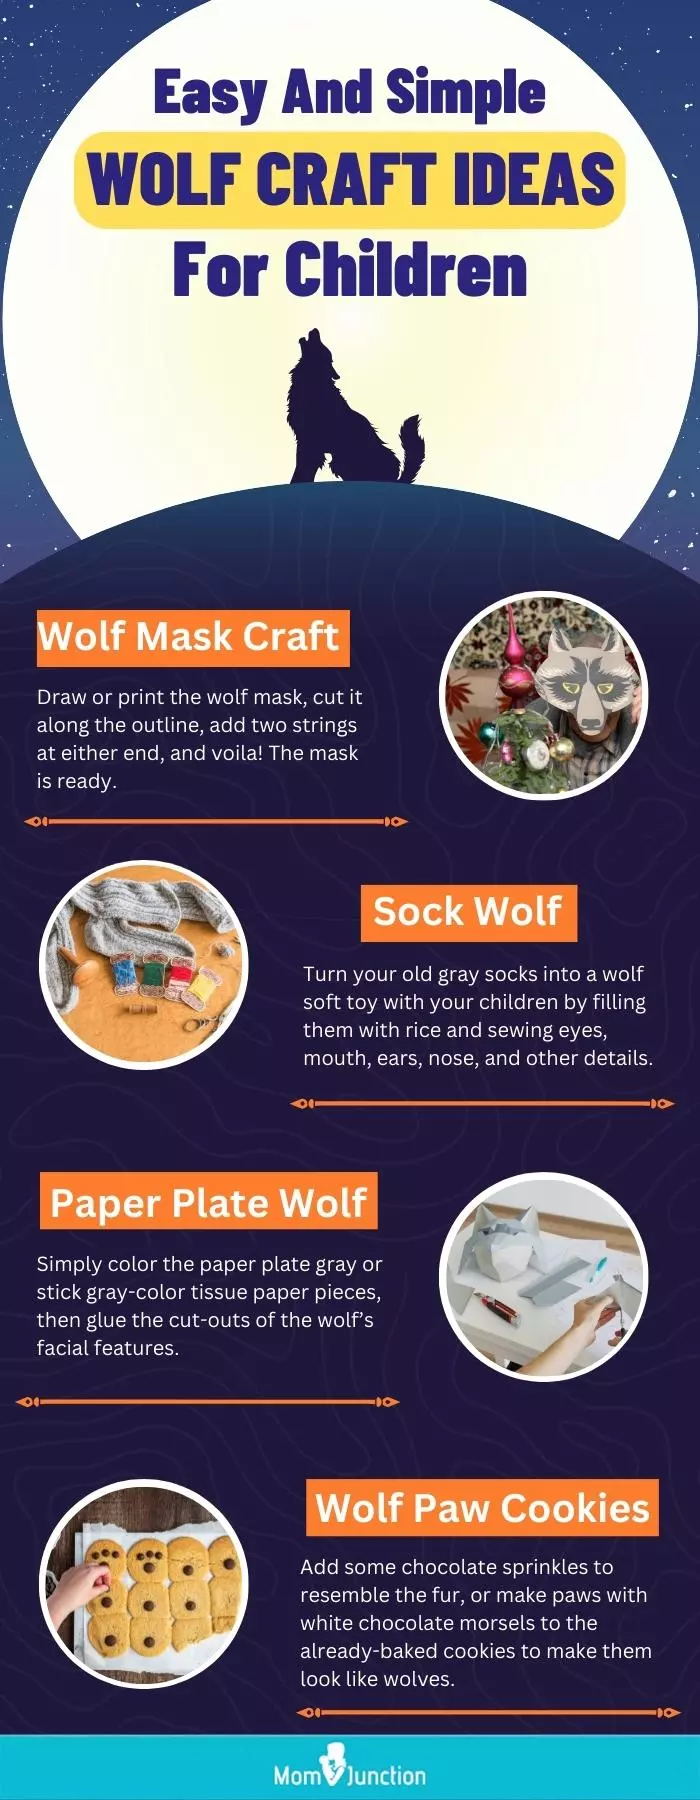 easy and simple wolf craft ideas for children (infographic)